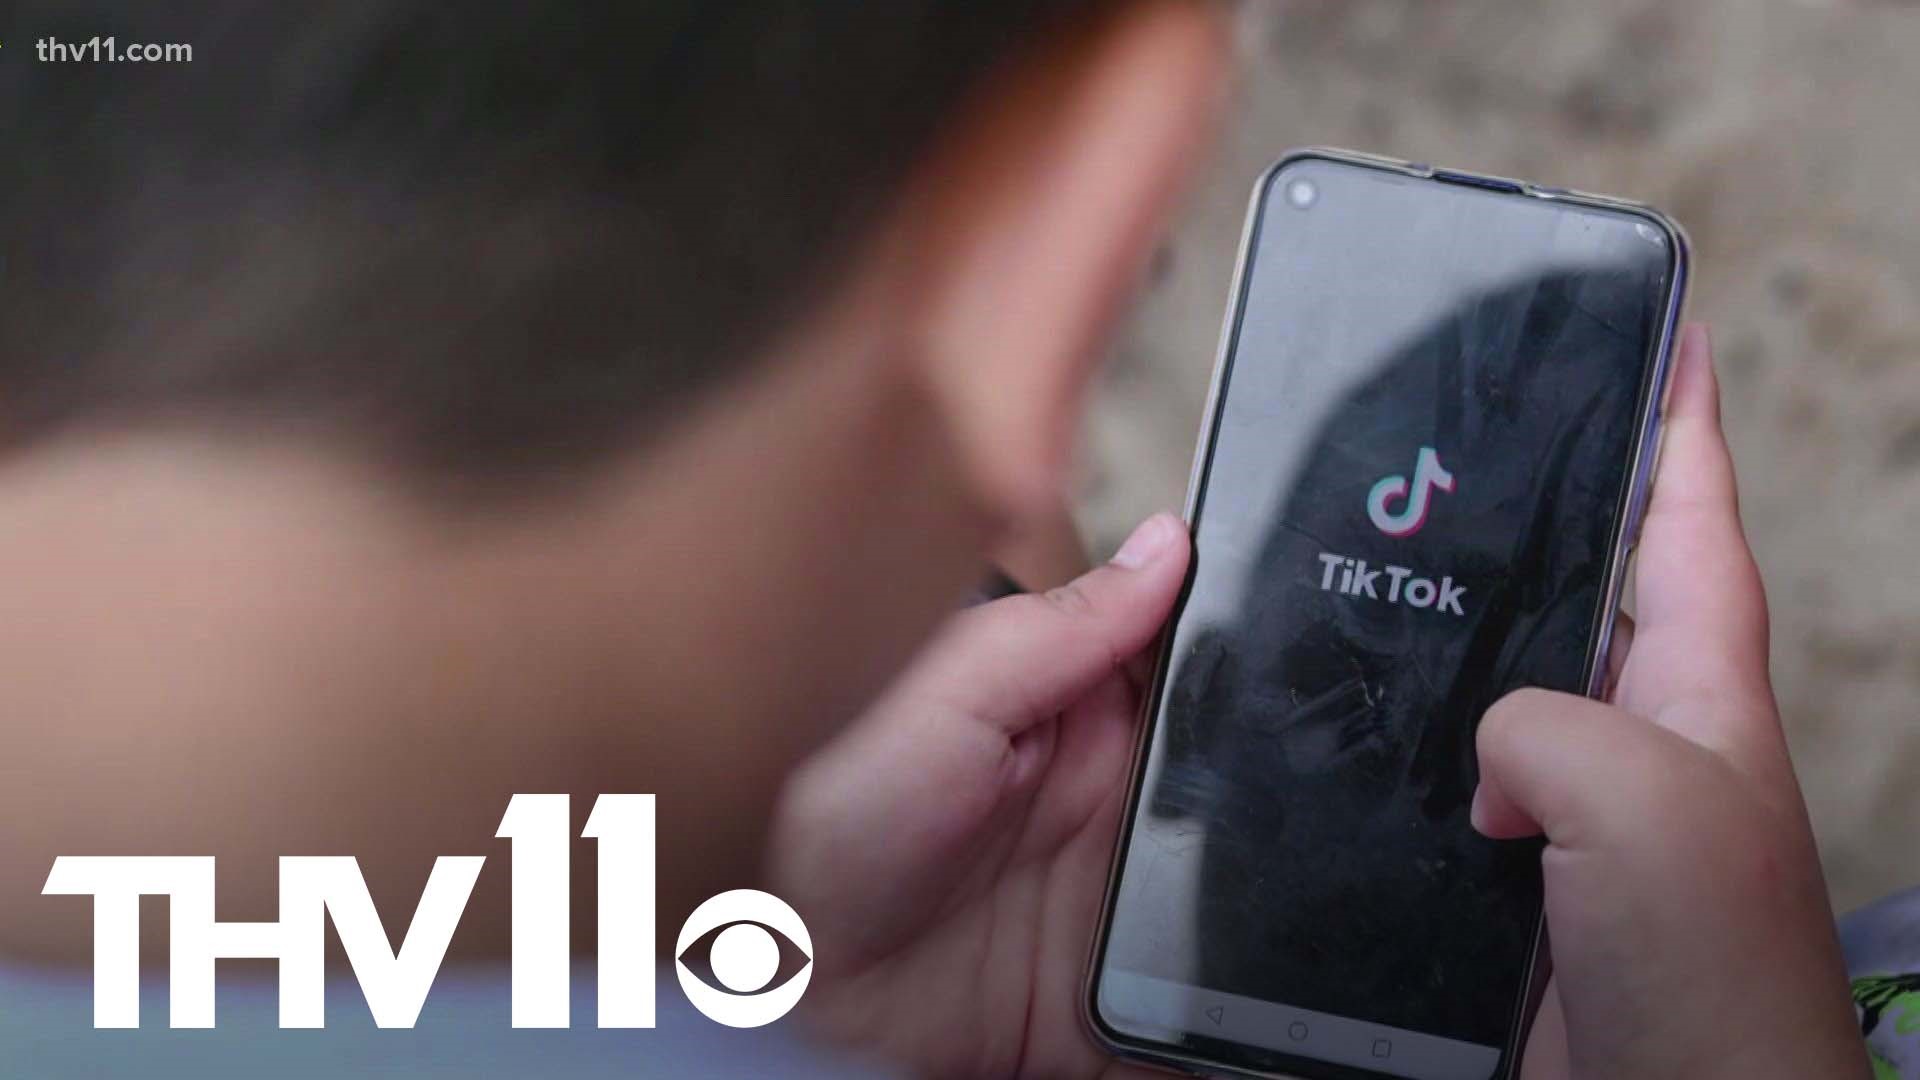 Multiple states are now banning the usage of TikTok on official government owned devices, and Arkansas could be joining that list soon.